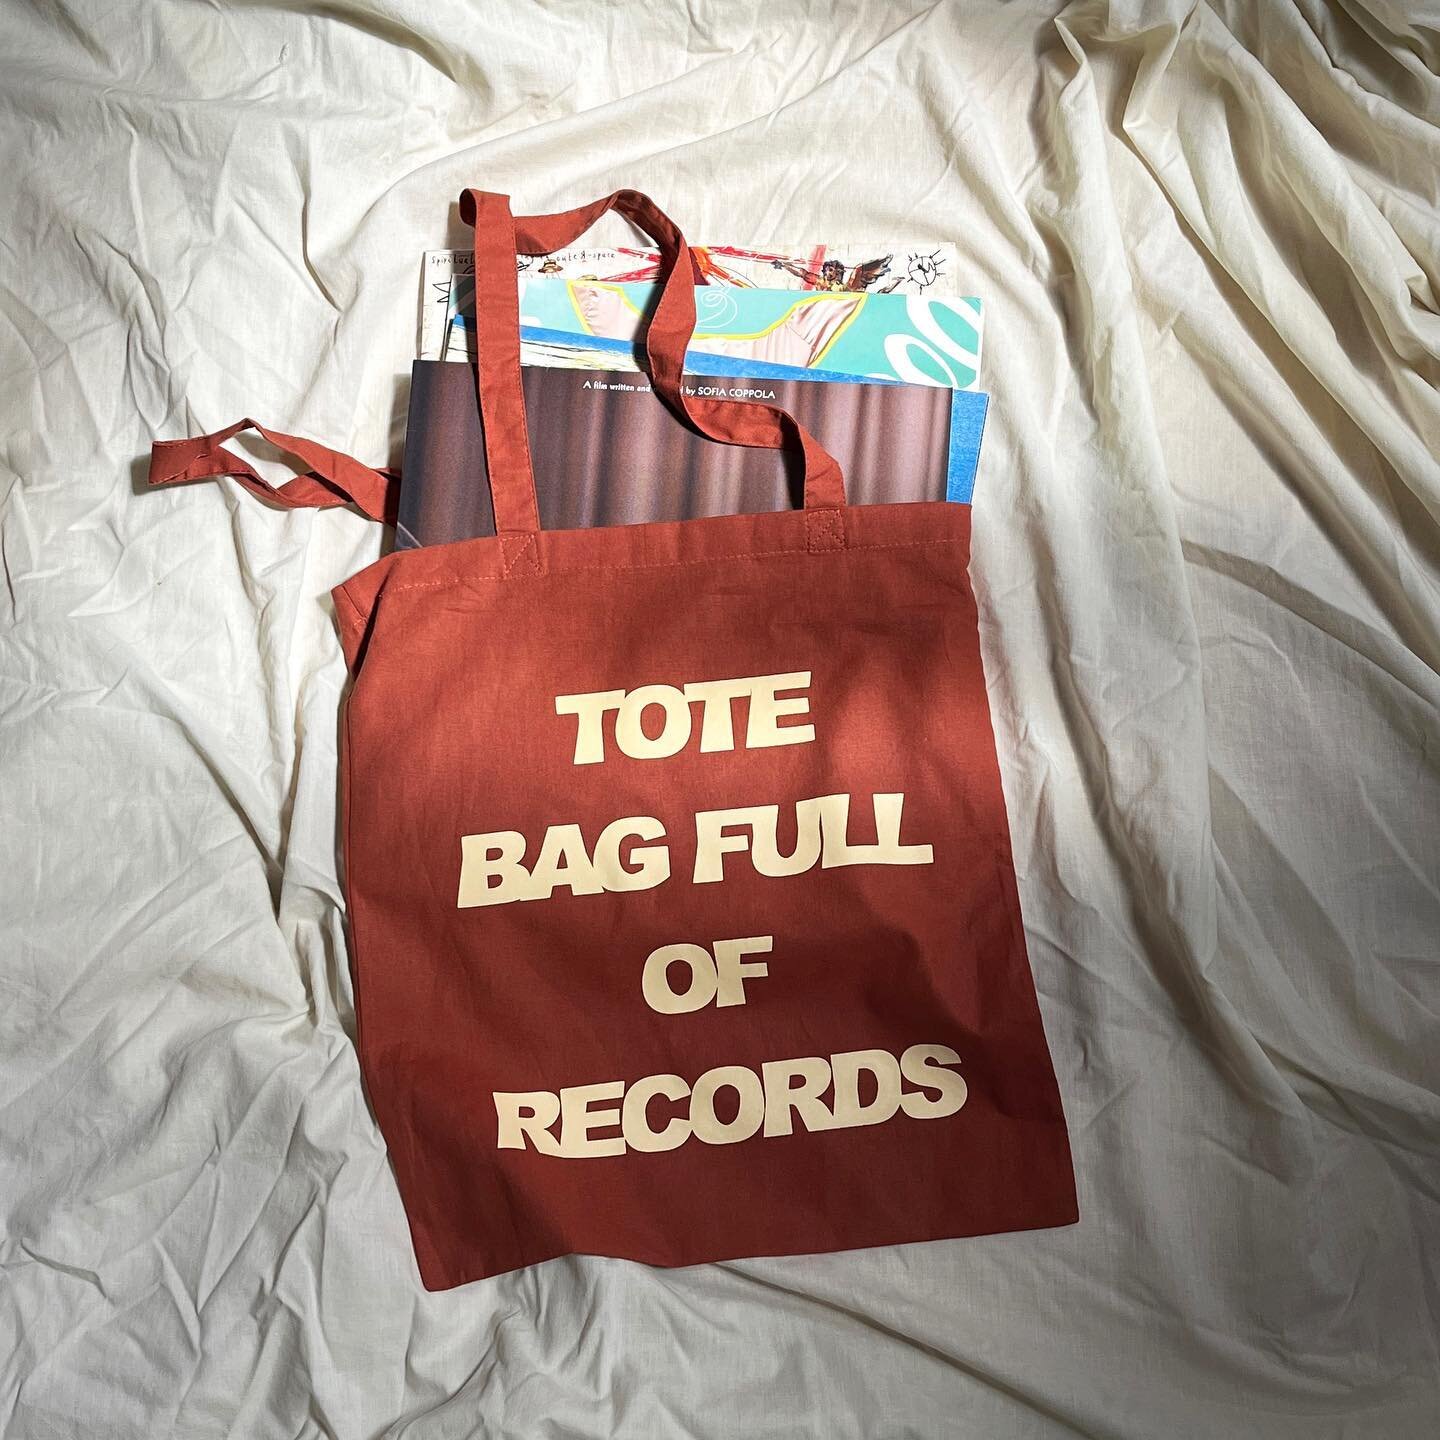 It&rsquo;s here&hellip;&hellip; the Independent Label Market exclusive tote! For all the records you&rsquo;re gonna buy at @indielabelmkt 😎 
Get yours on Saturday at Coal Drops Yard, Kings Cross- we&rsquo;ll be there all day, 11-6:30pm!